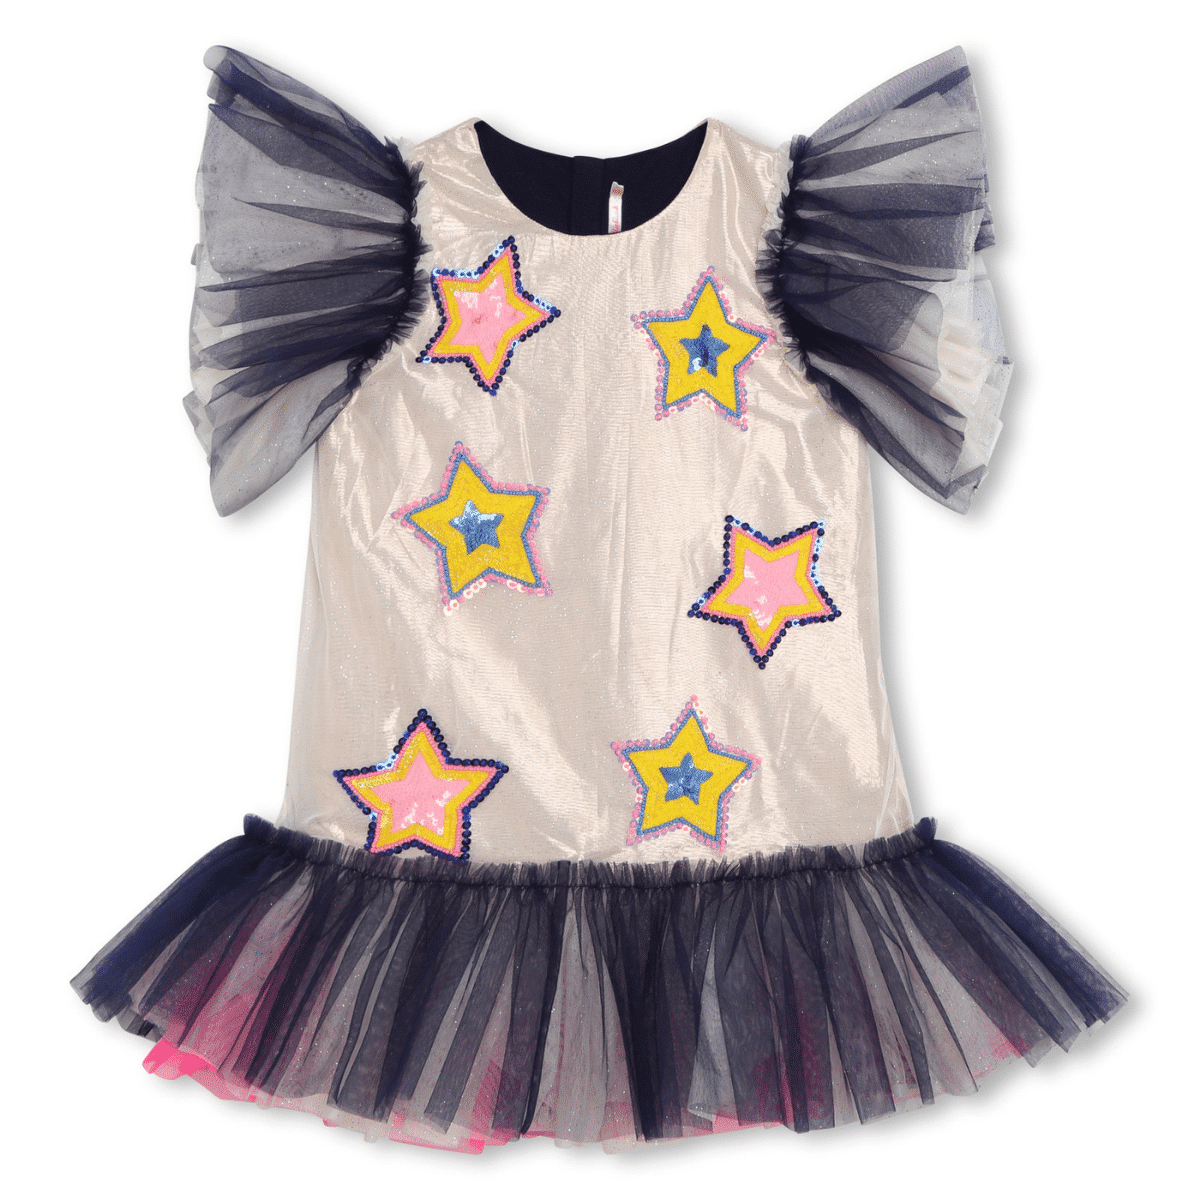 billieblush stars party dress front view